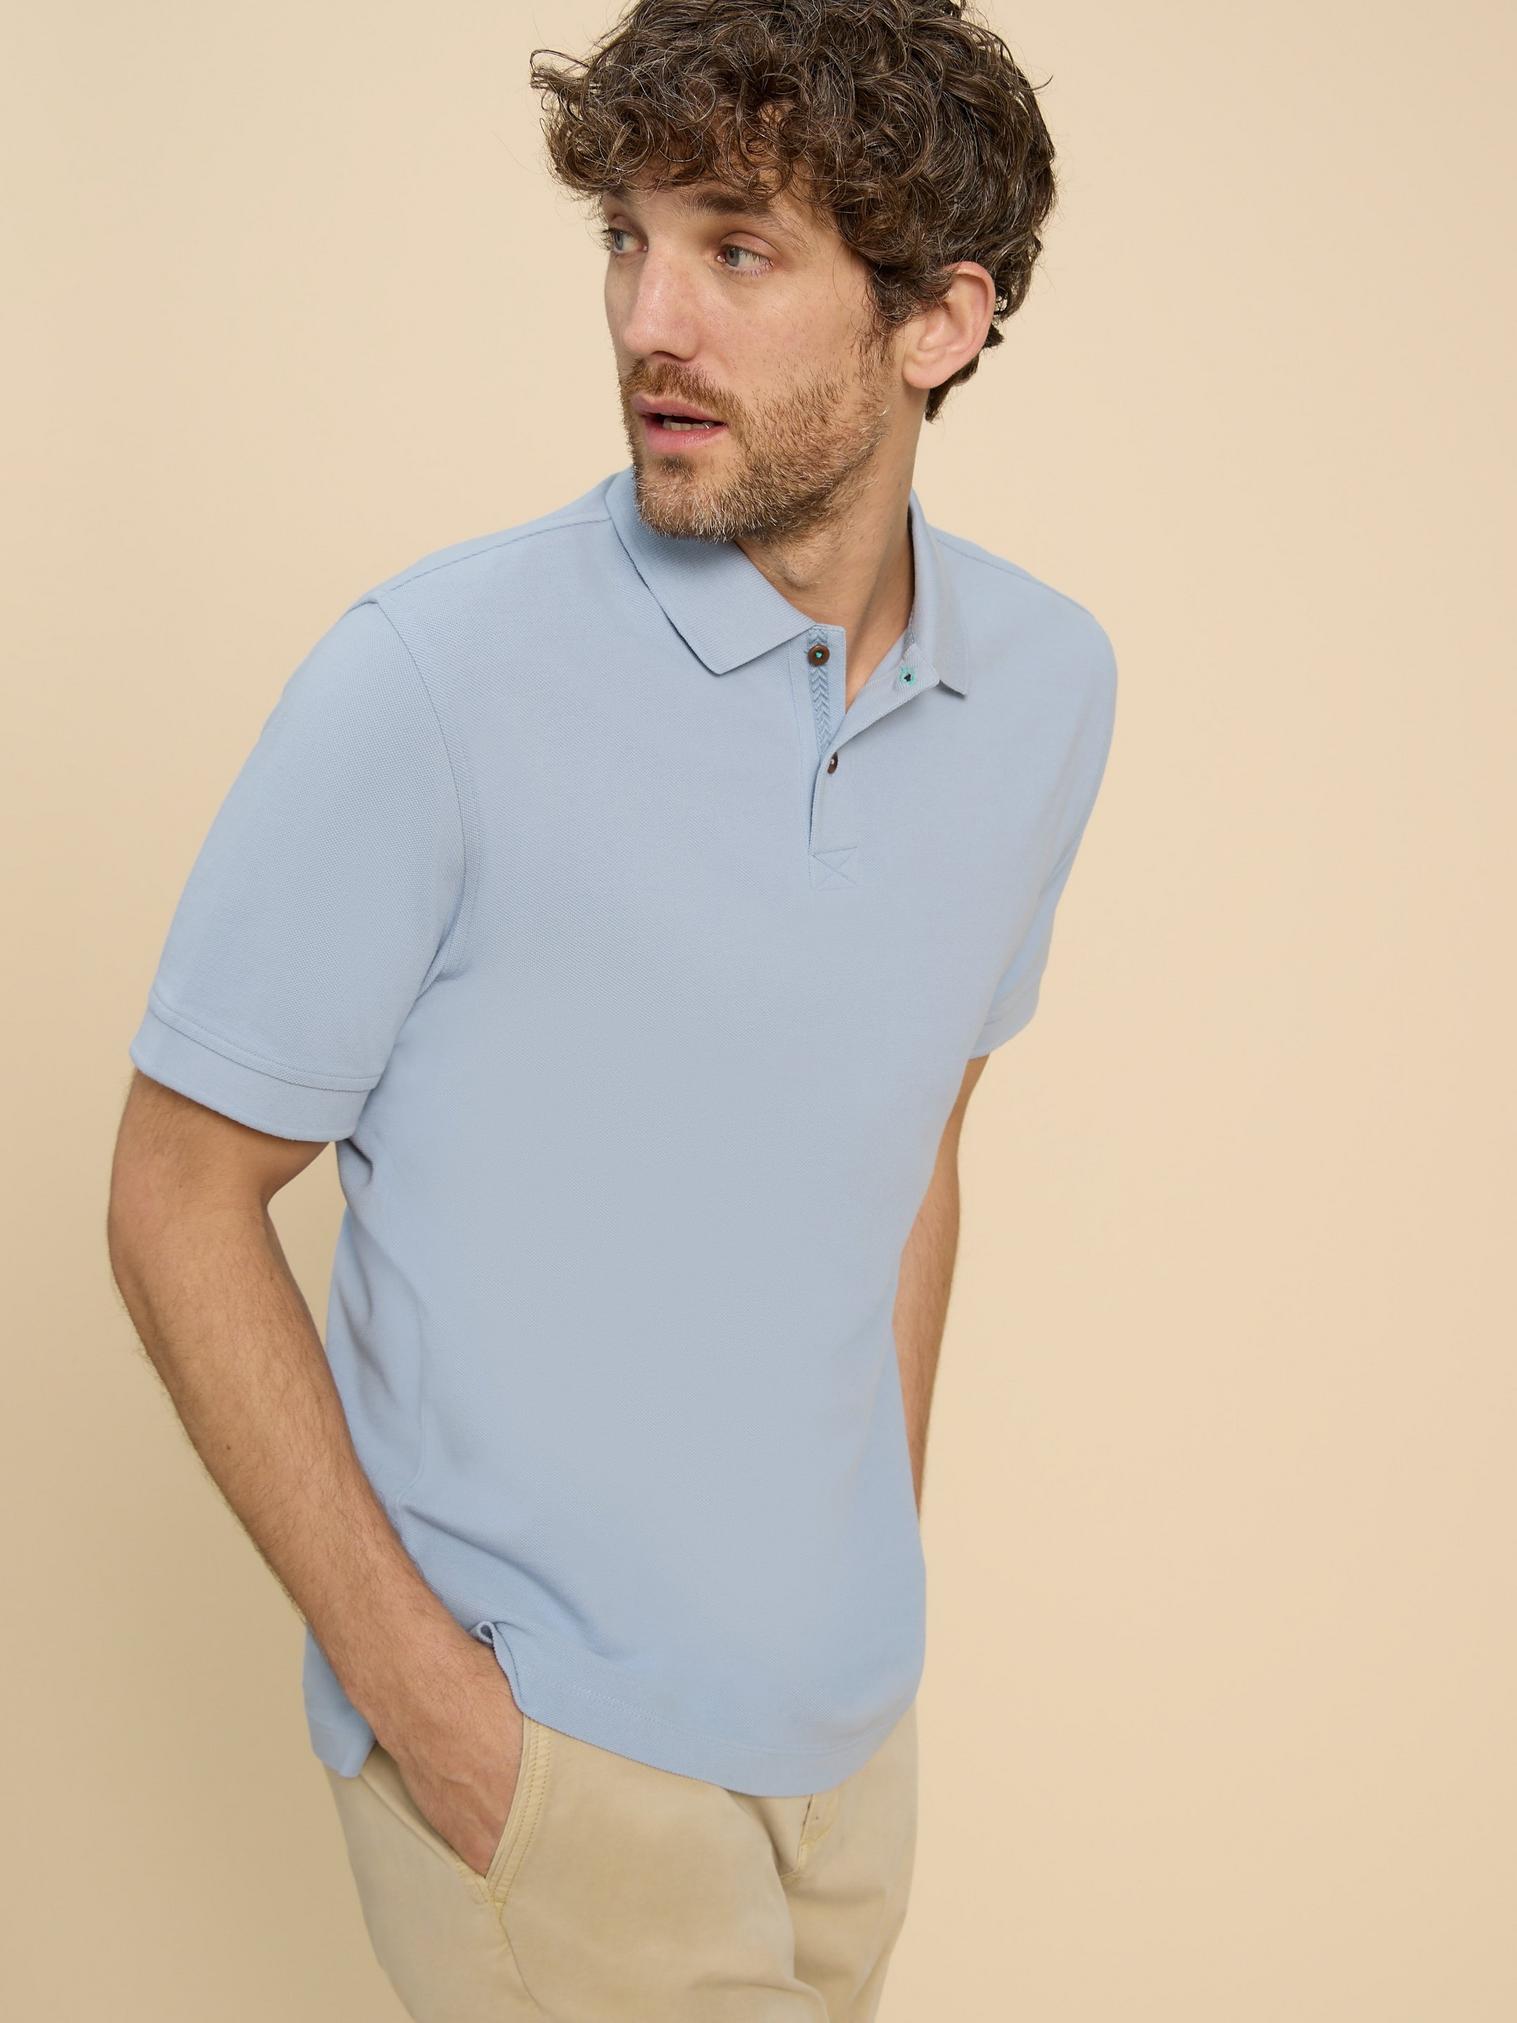 Utility Polo in LGT BLUE - LIFESTYLE